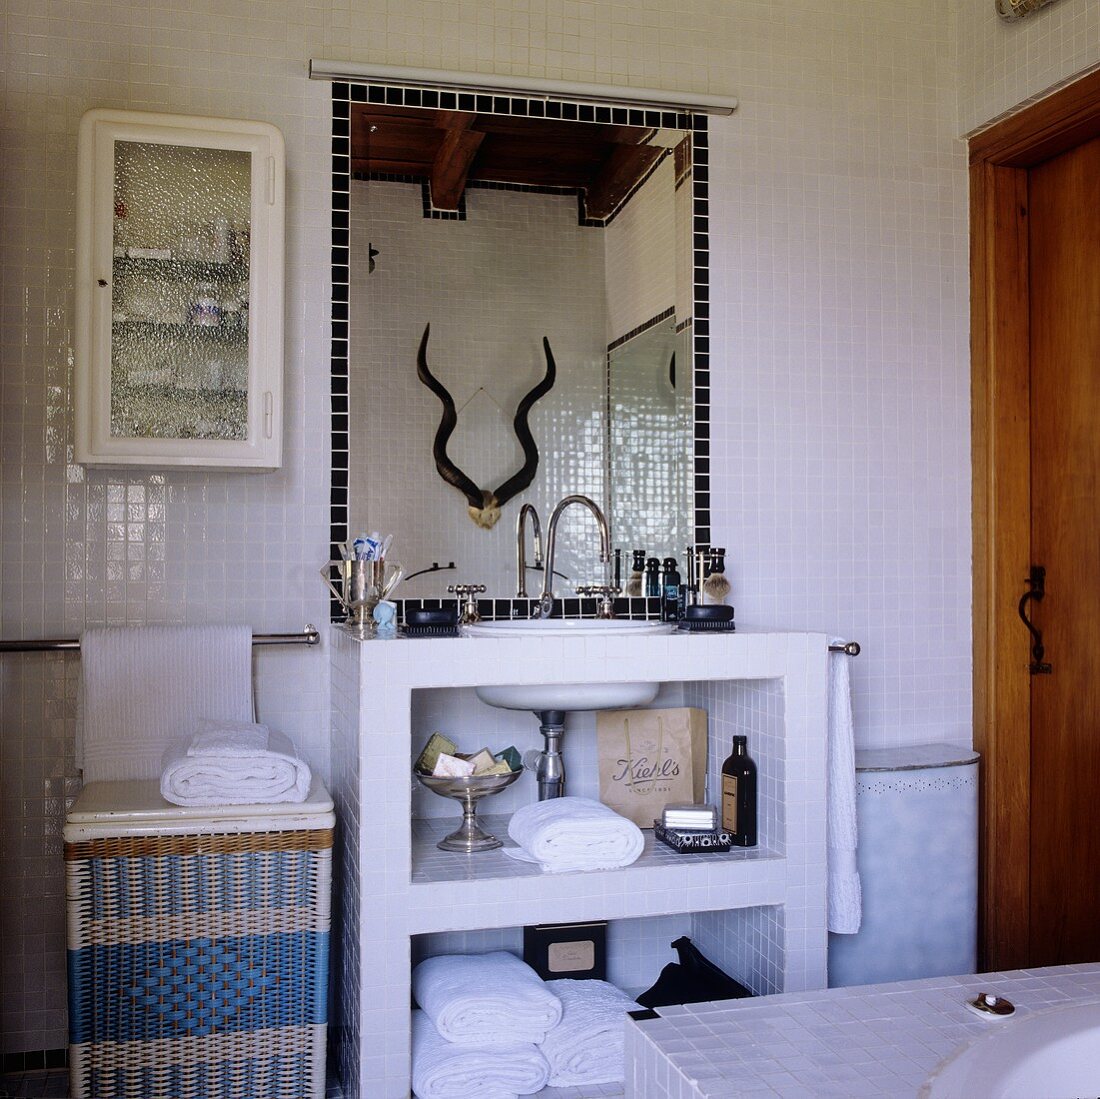 A bathroom in a South African country house - a stone wash stand with a mirror on a white, mosaic-tiled wall